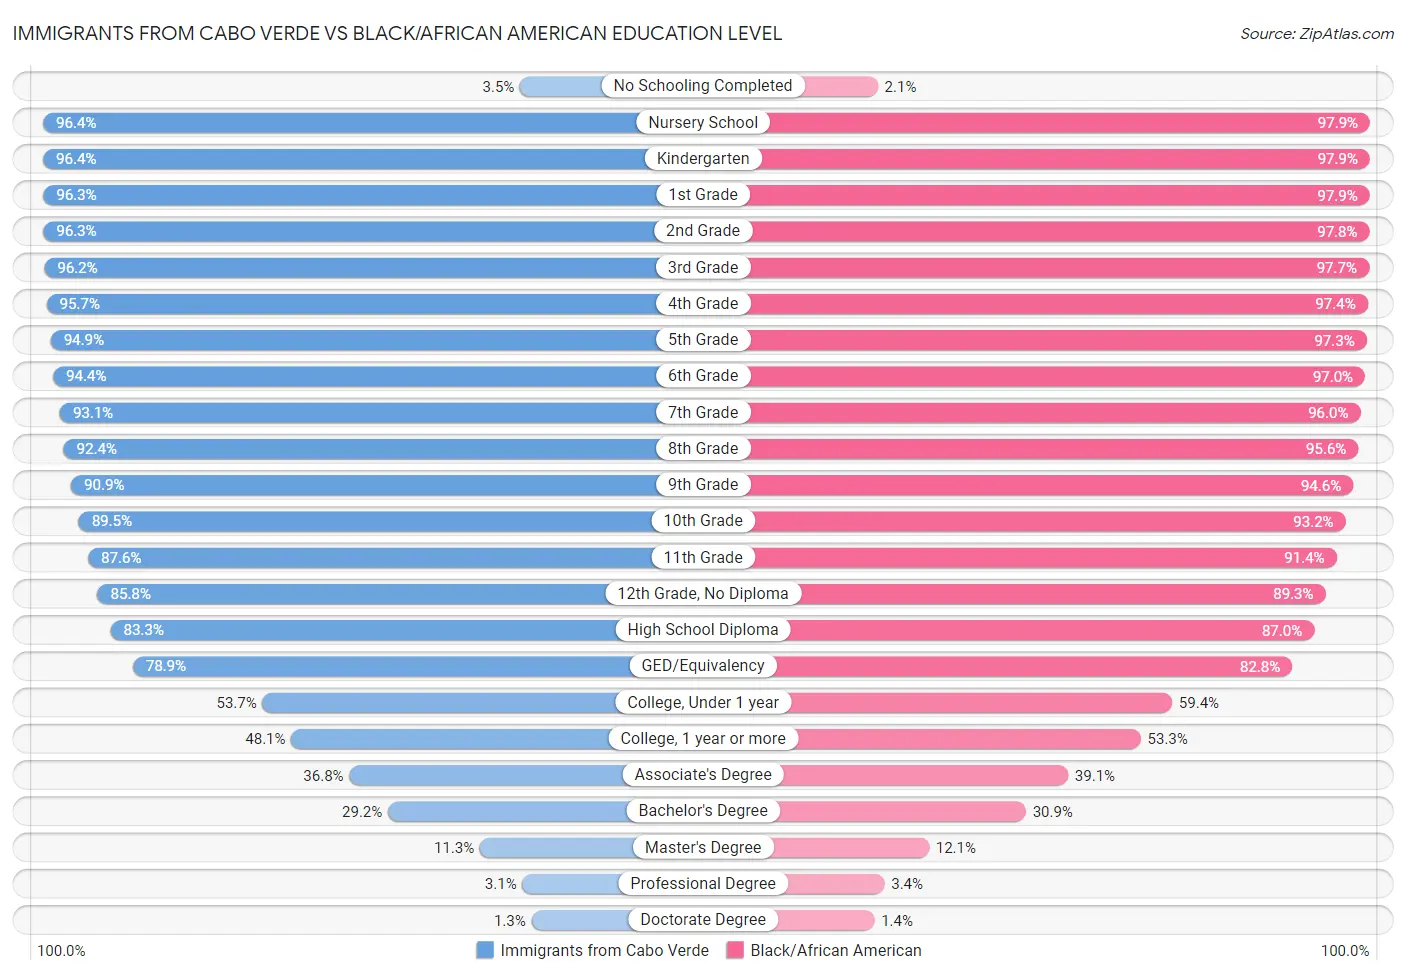 Immigrants from Cabo Verde vs Black/African American Education Level